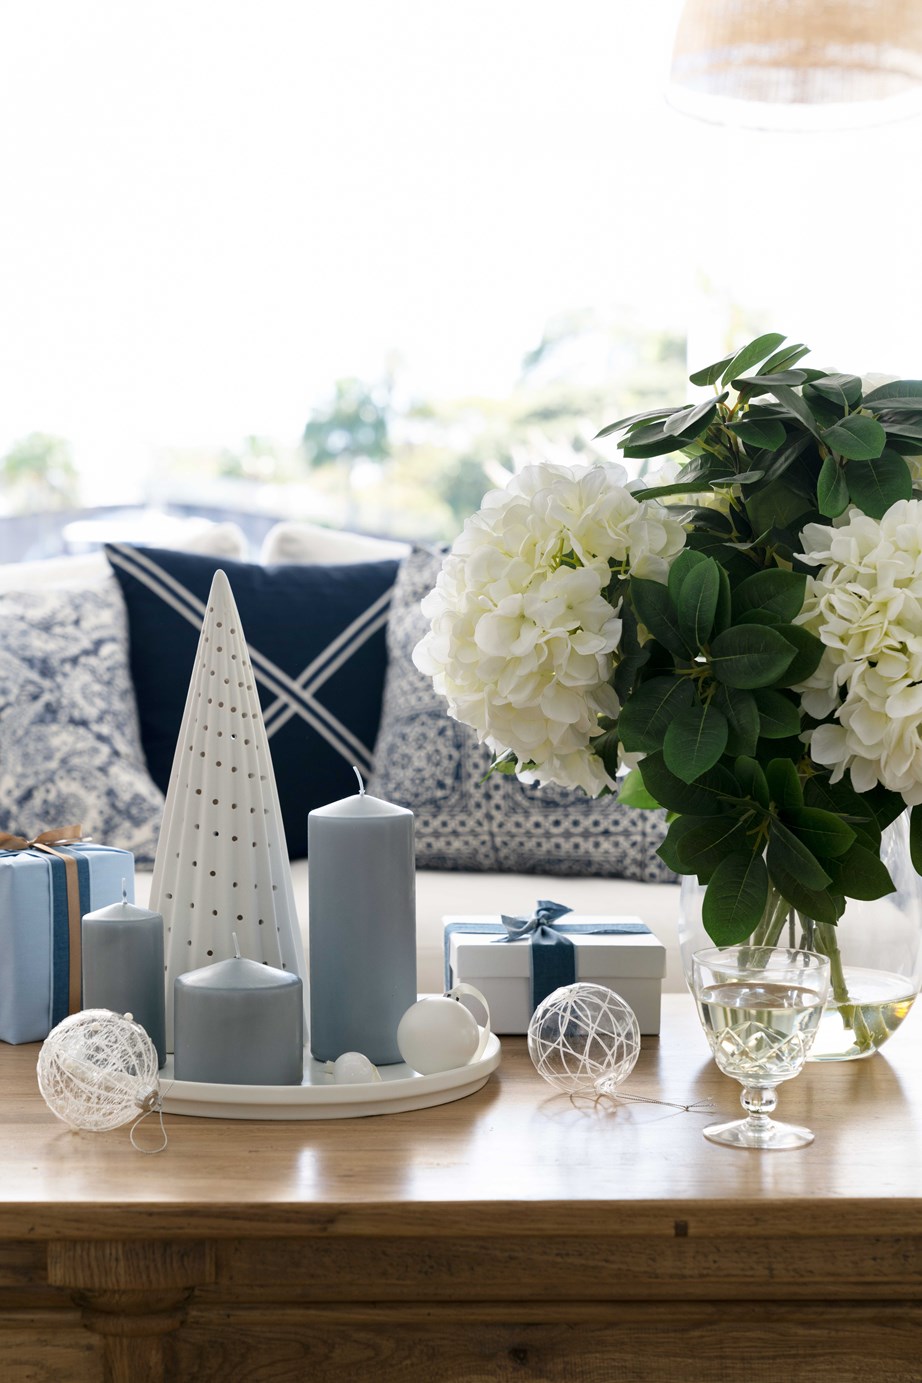 Change up your [Christmas colour palette](https://www.homestolove.com.au/hamptons-christmas-home-23131|target="_blank") each year. 
*Photo: Louise Roche | Story: Home Beautiful*